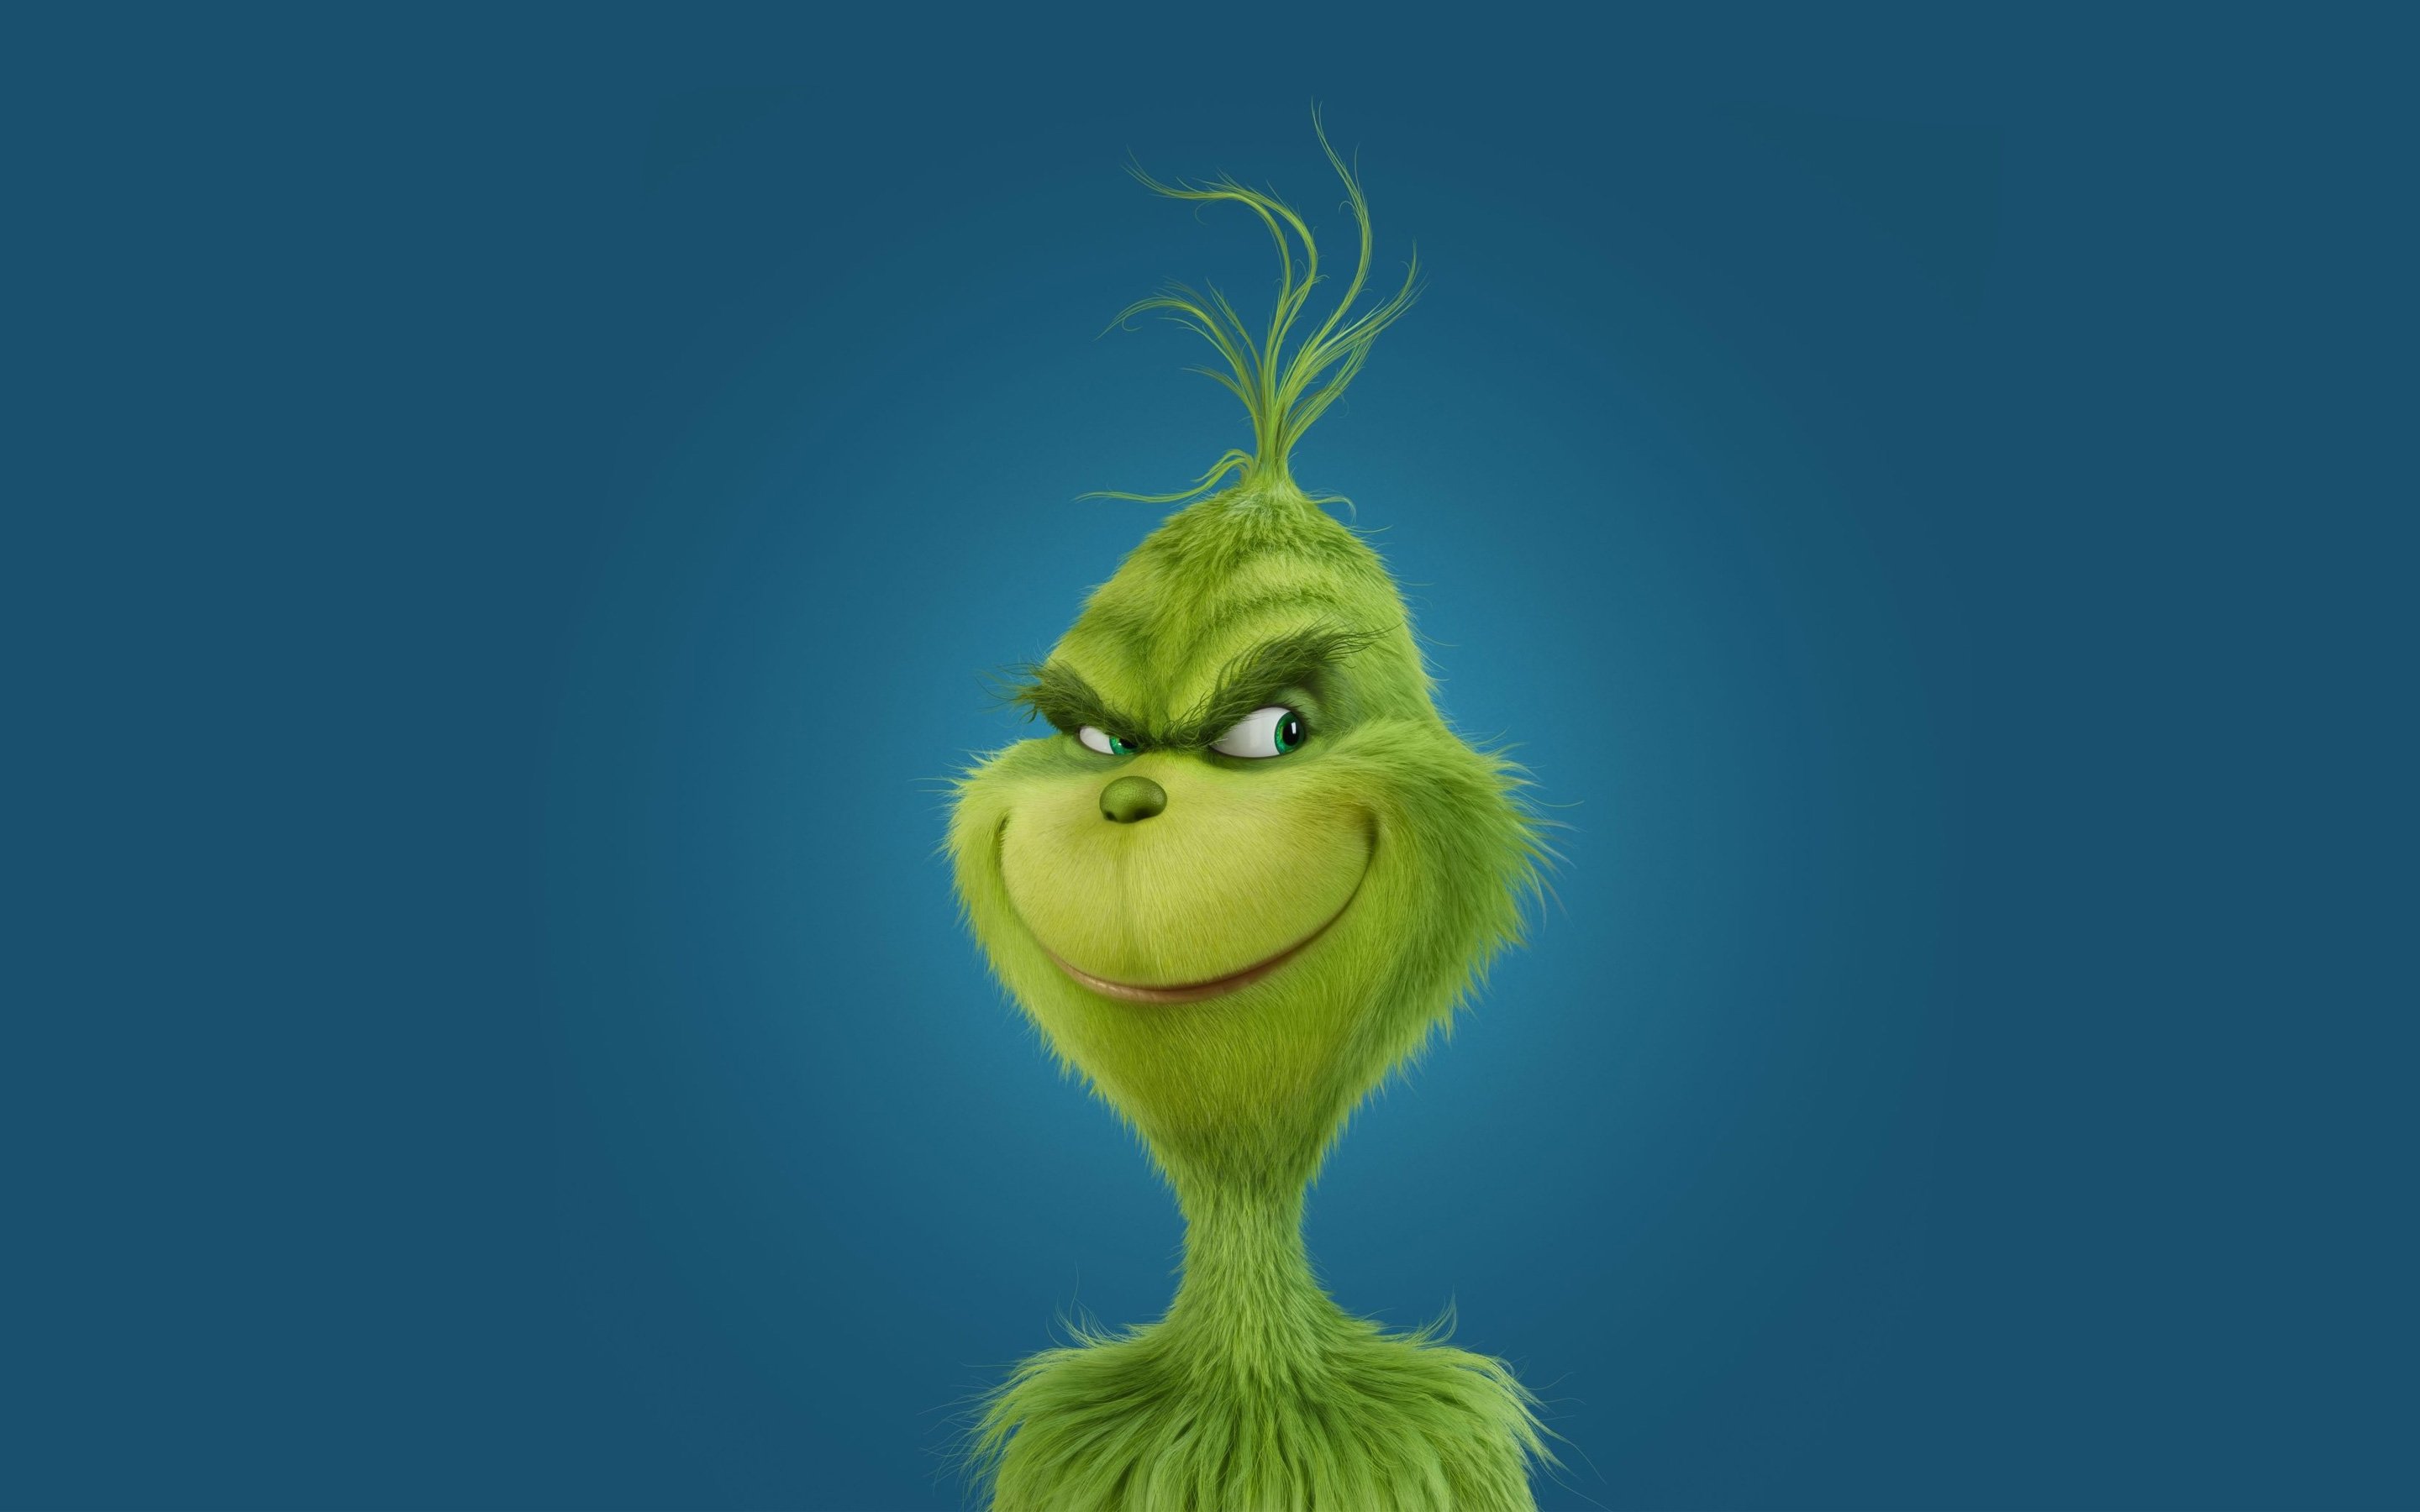 Grinch 4K wallpaper for your desktop or mobile screen free and easy to download